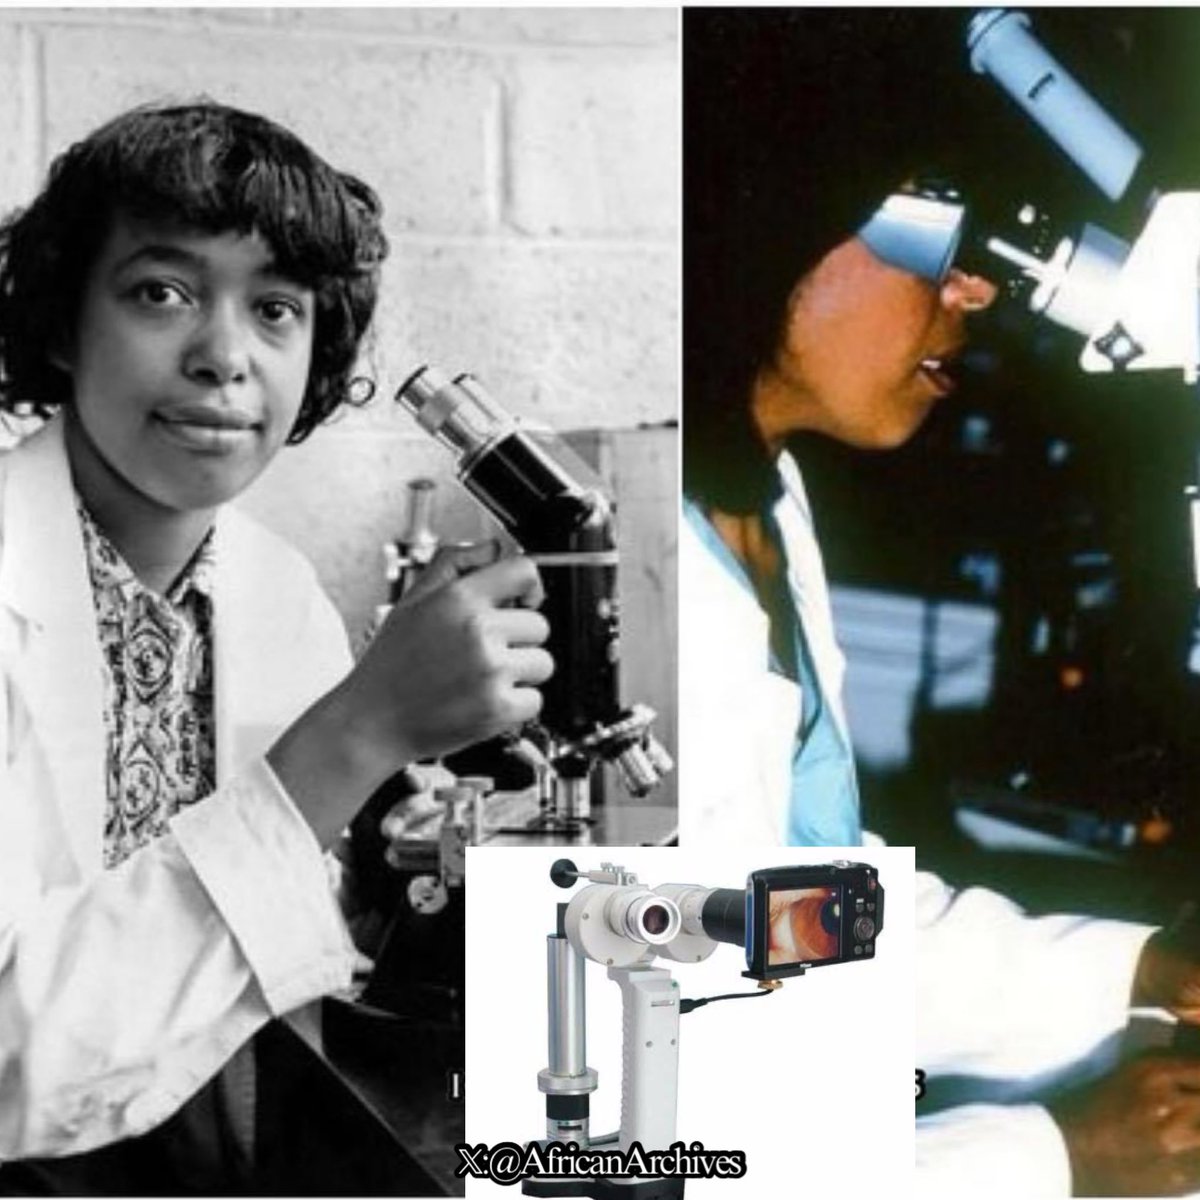 On this day in 1988, the late Dr. Patricia Era Bath received a patent for her Invention, the Laserphaco Probe. It’s used worldwide in eye surgery to remove cataracts and she also founded the American Institute for the Prevention of Blindness. She restored sight to millions of